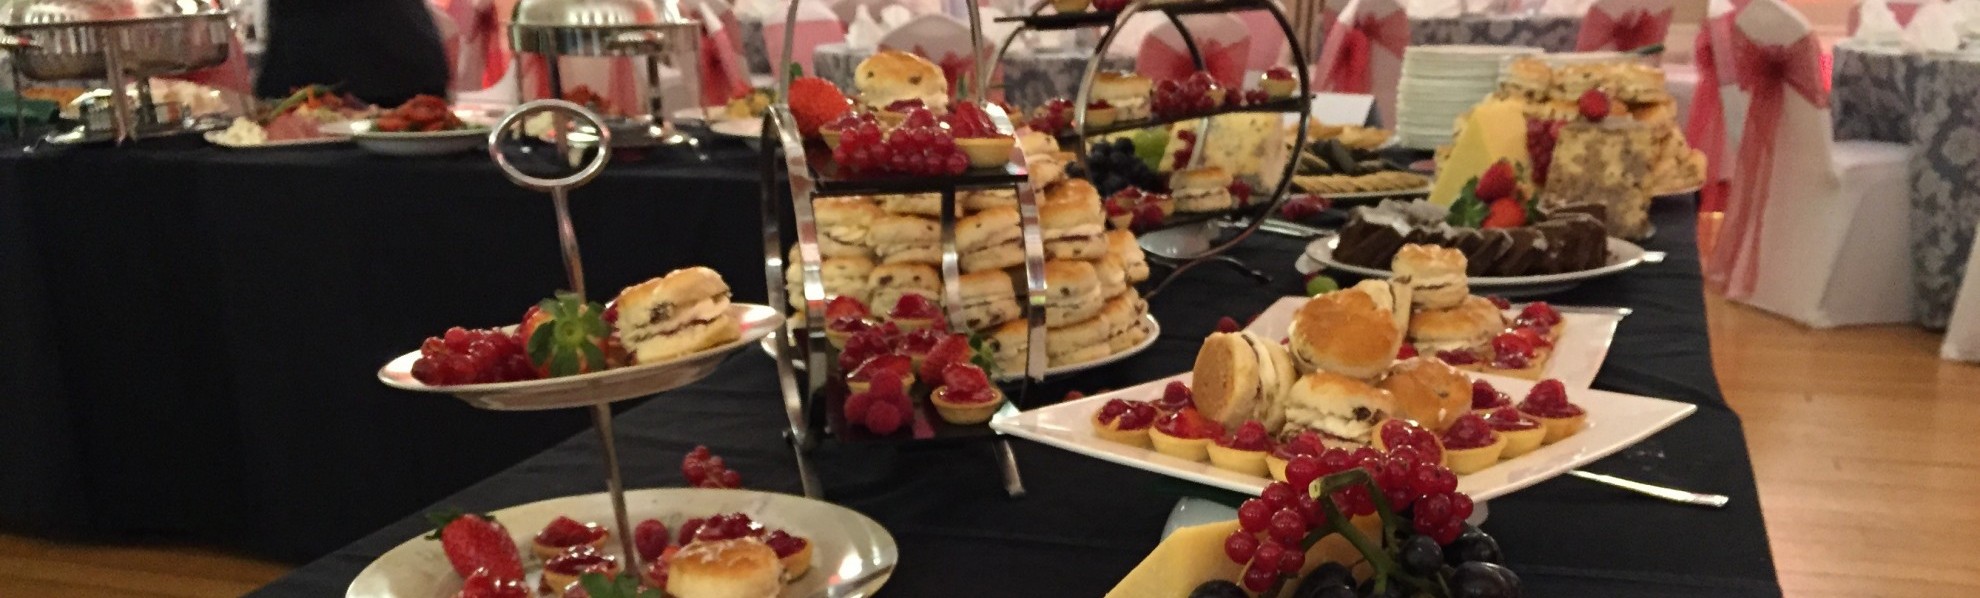 Catering-Buffet-at-Cunliffe-Hall